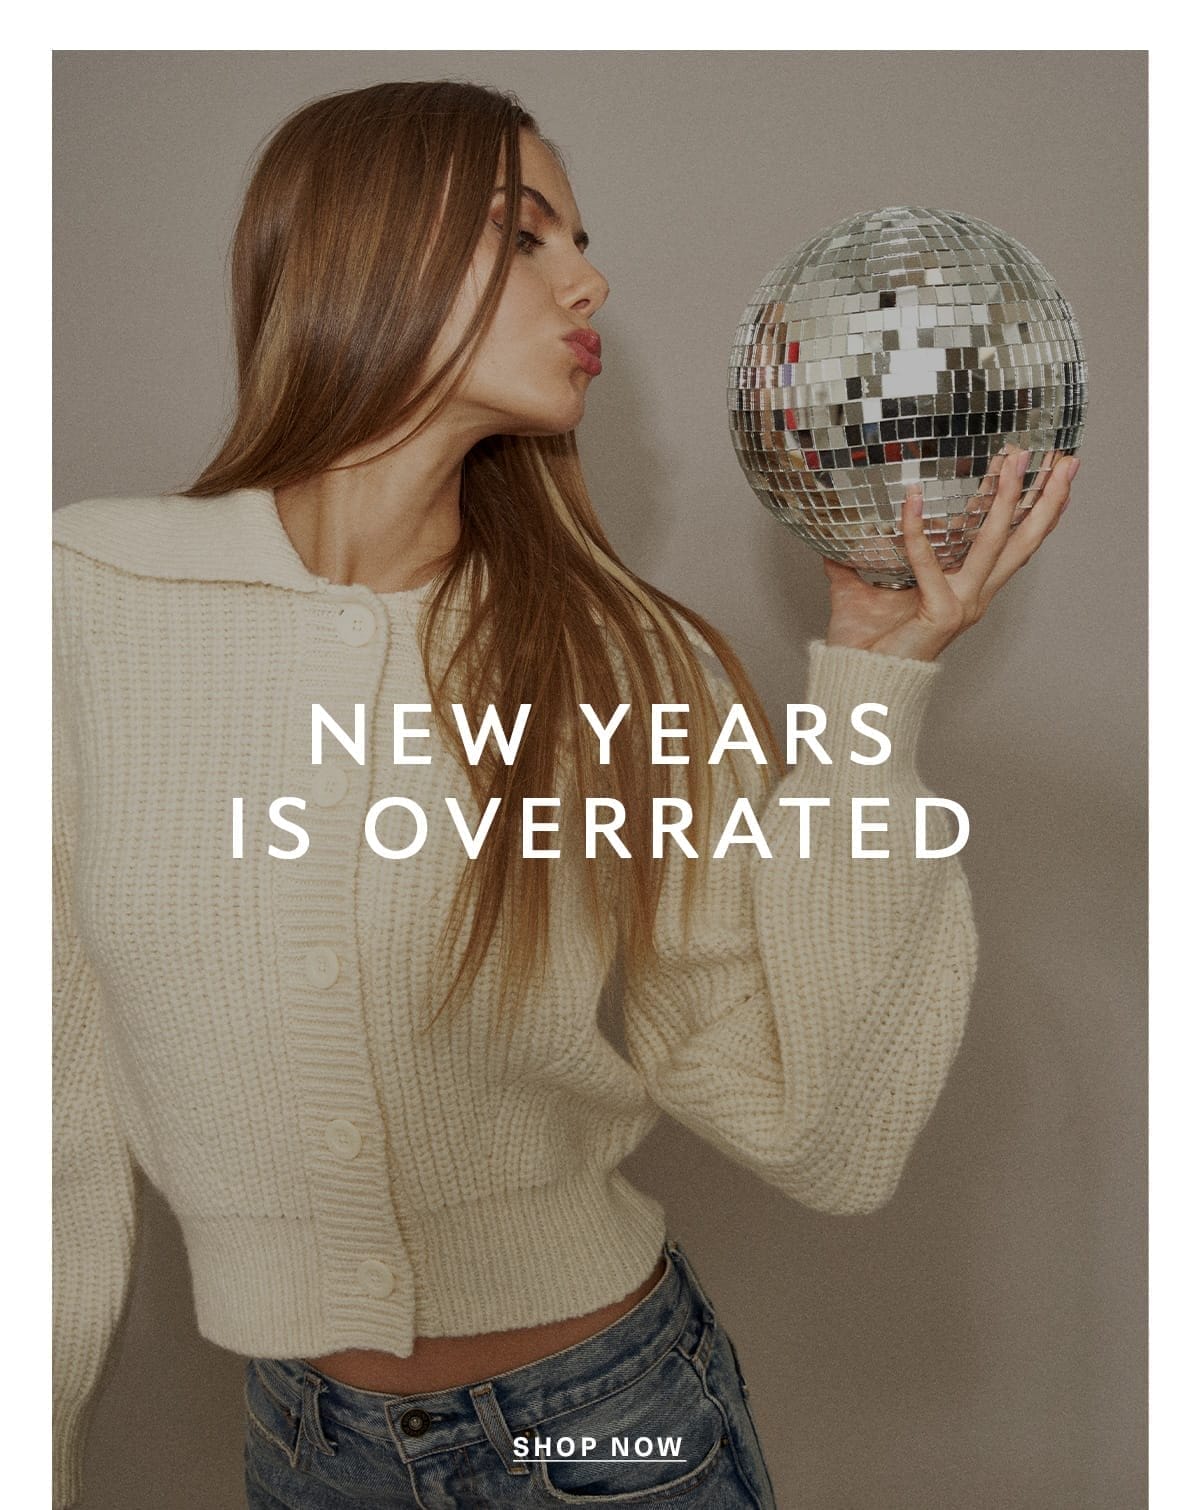 NEW YEARS IS OVERRATED SHOP NOW